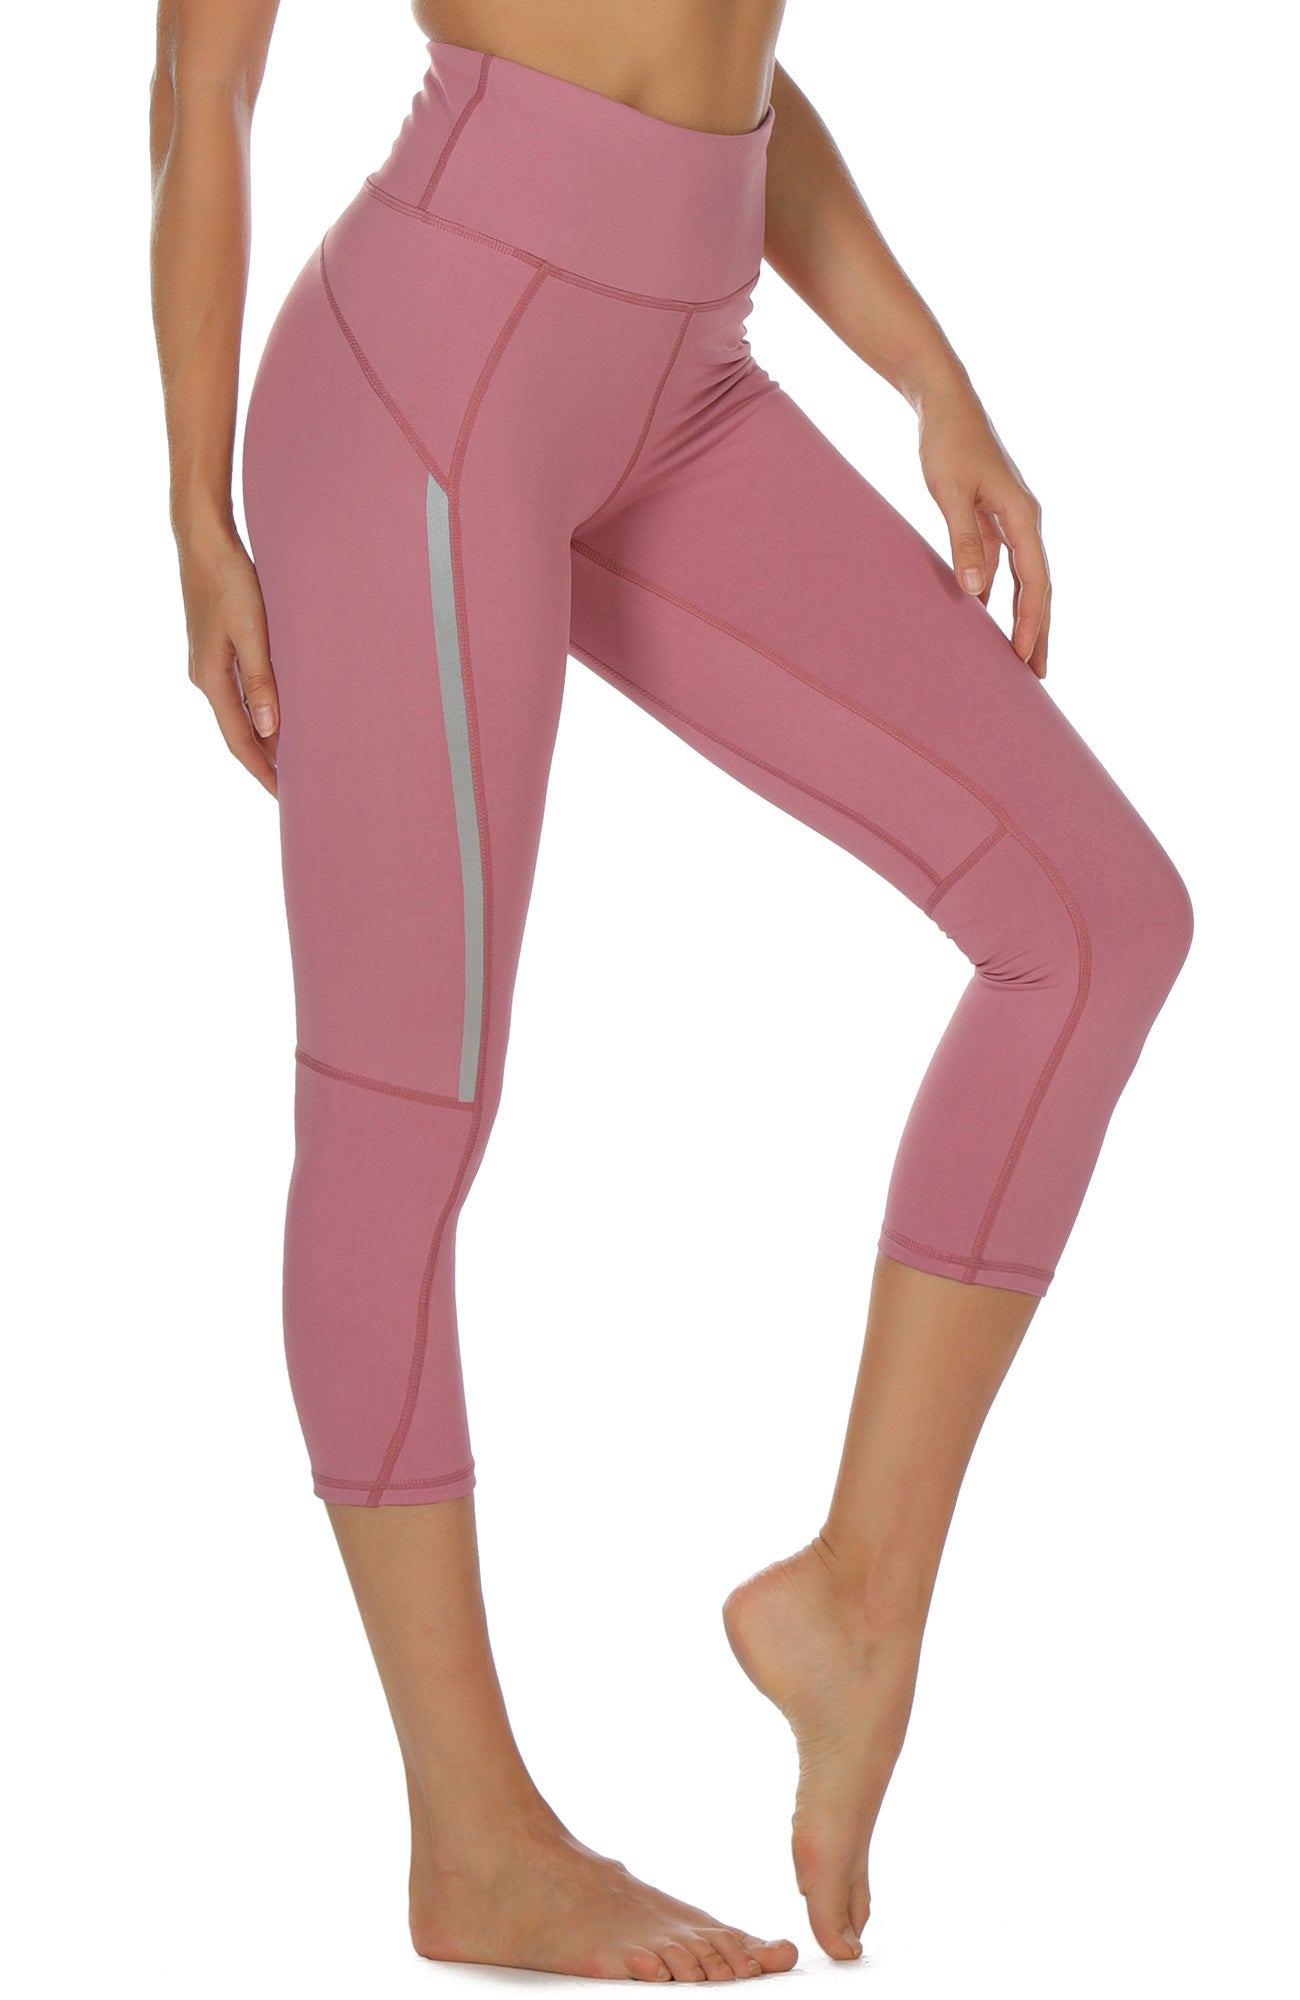 icyzone Capri Yoga Pants for Women High Waisted Workout Athletic